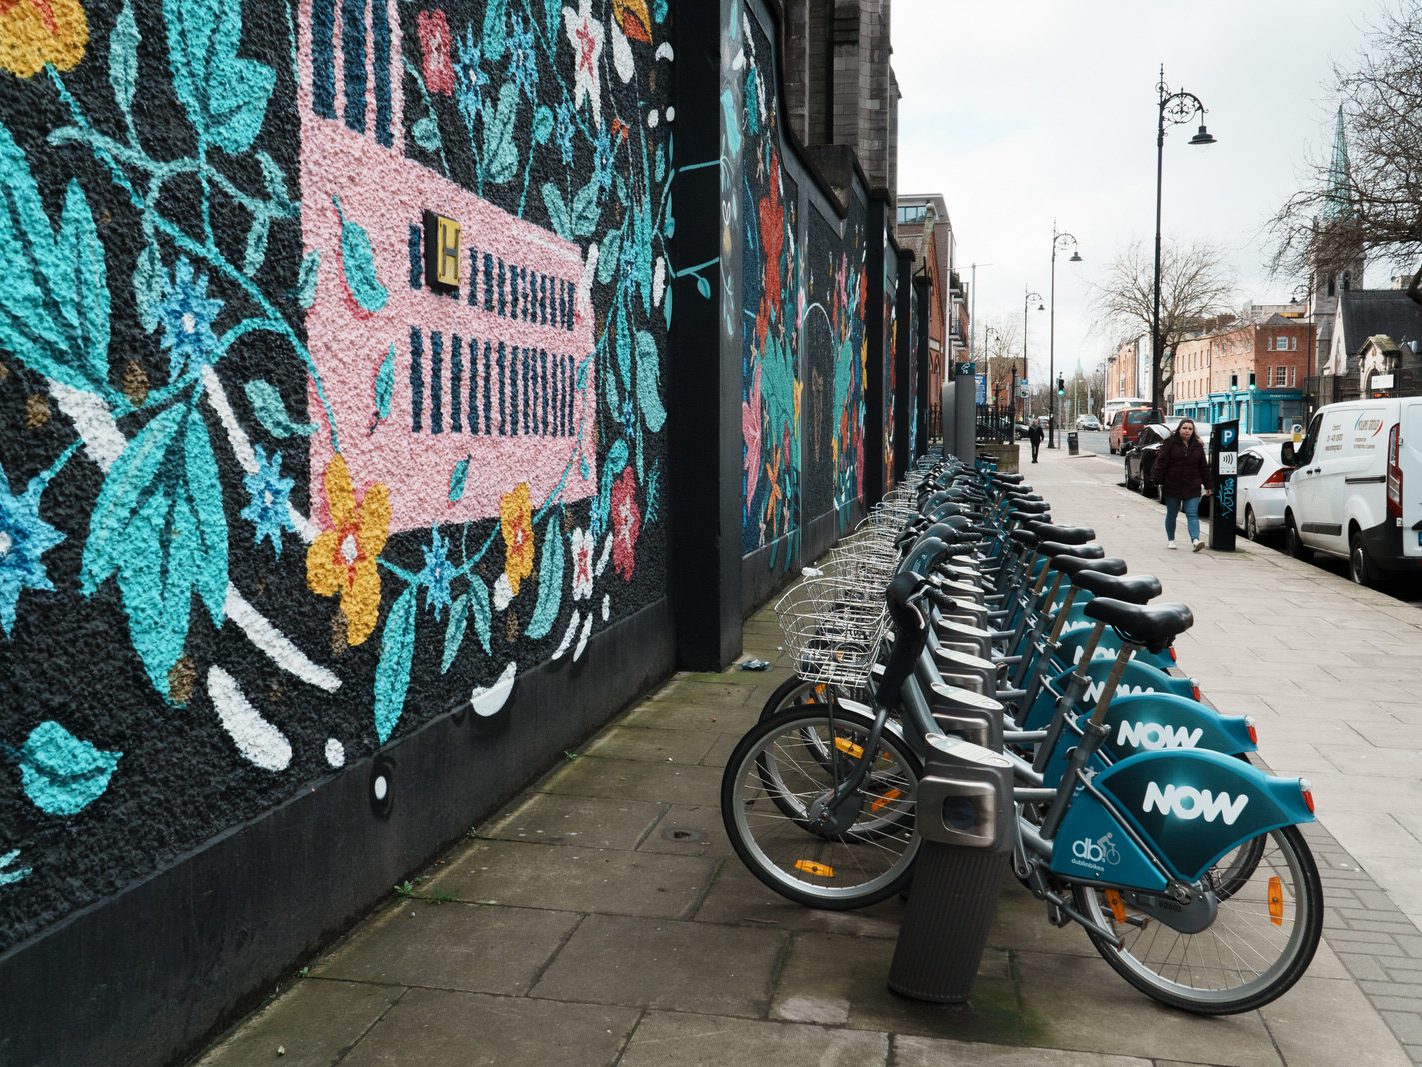 TWO FOR THE PRICE OF ONE [DUBLINBIKES DOCKING STATION 75 AND A MURAL BY HOLLY PEREIRA]-229689-1